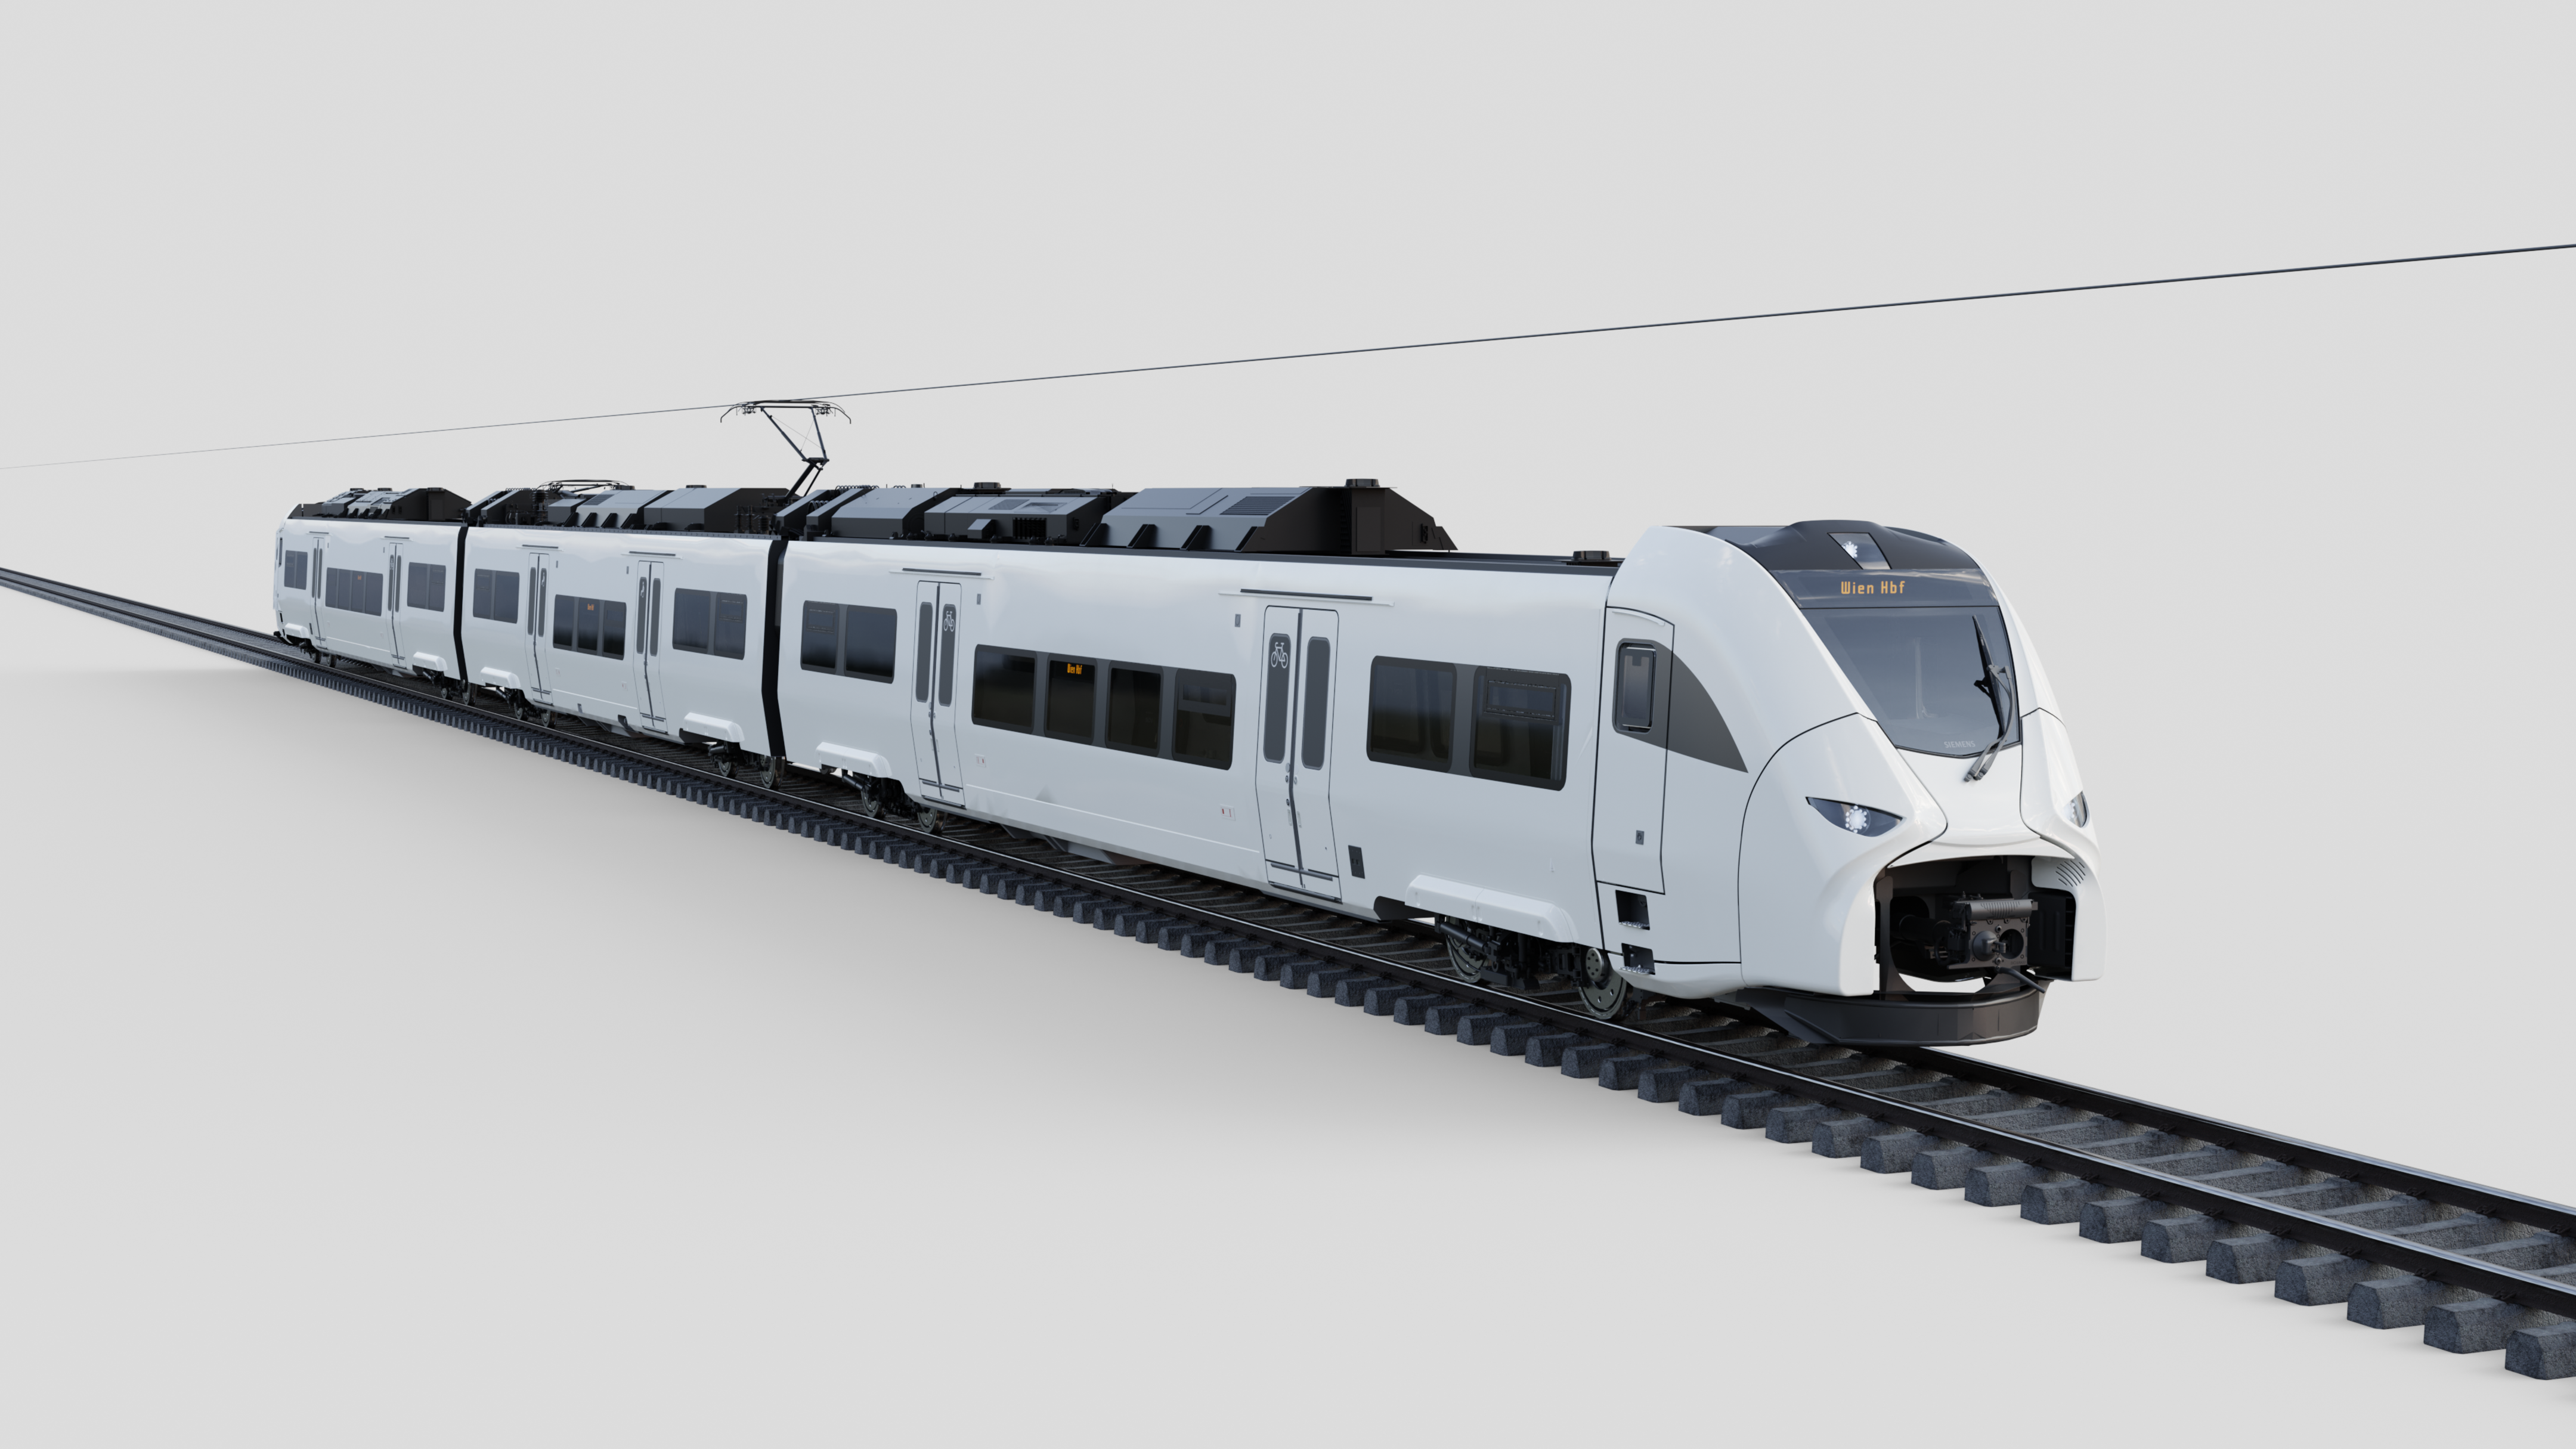 The Mireo electric multiple-unit trains are especially ecofriendly thanks to their low energy consumption and lightweight construction